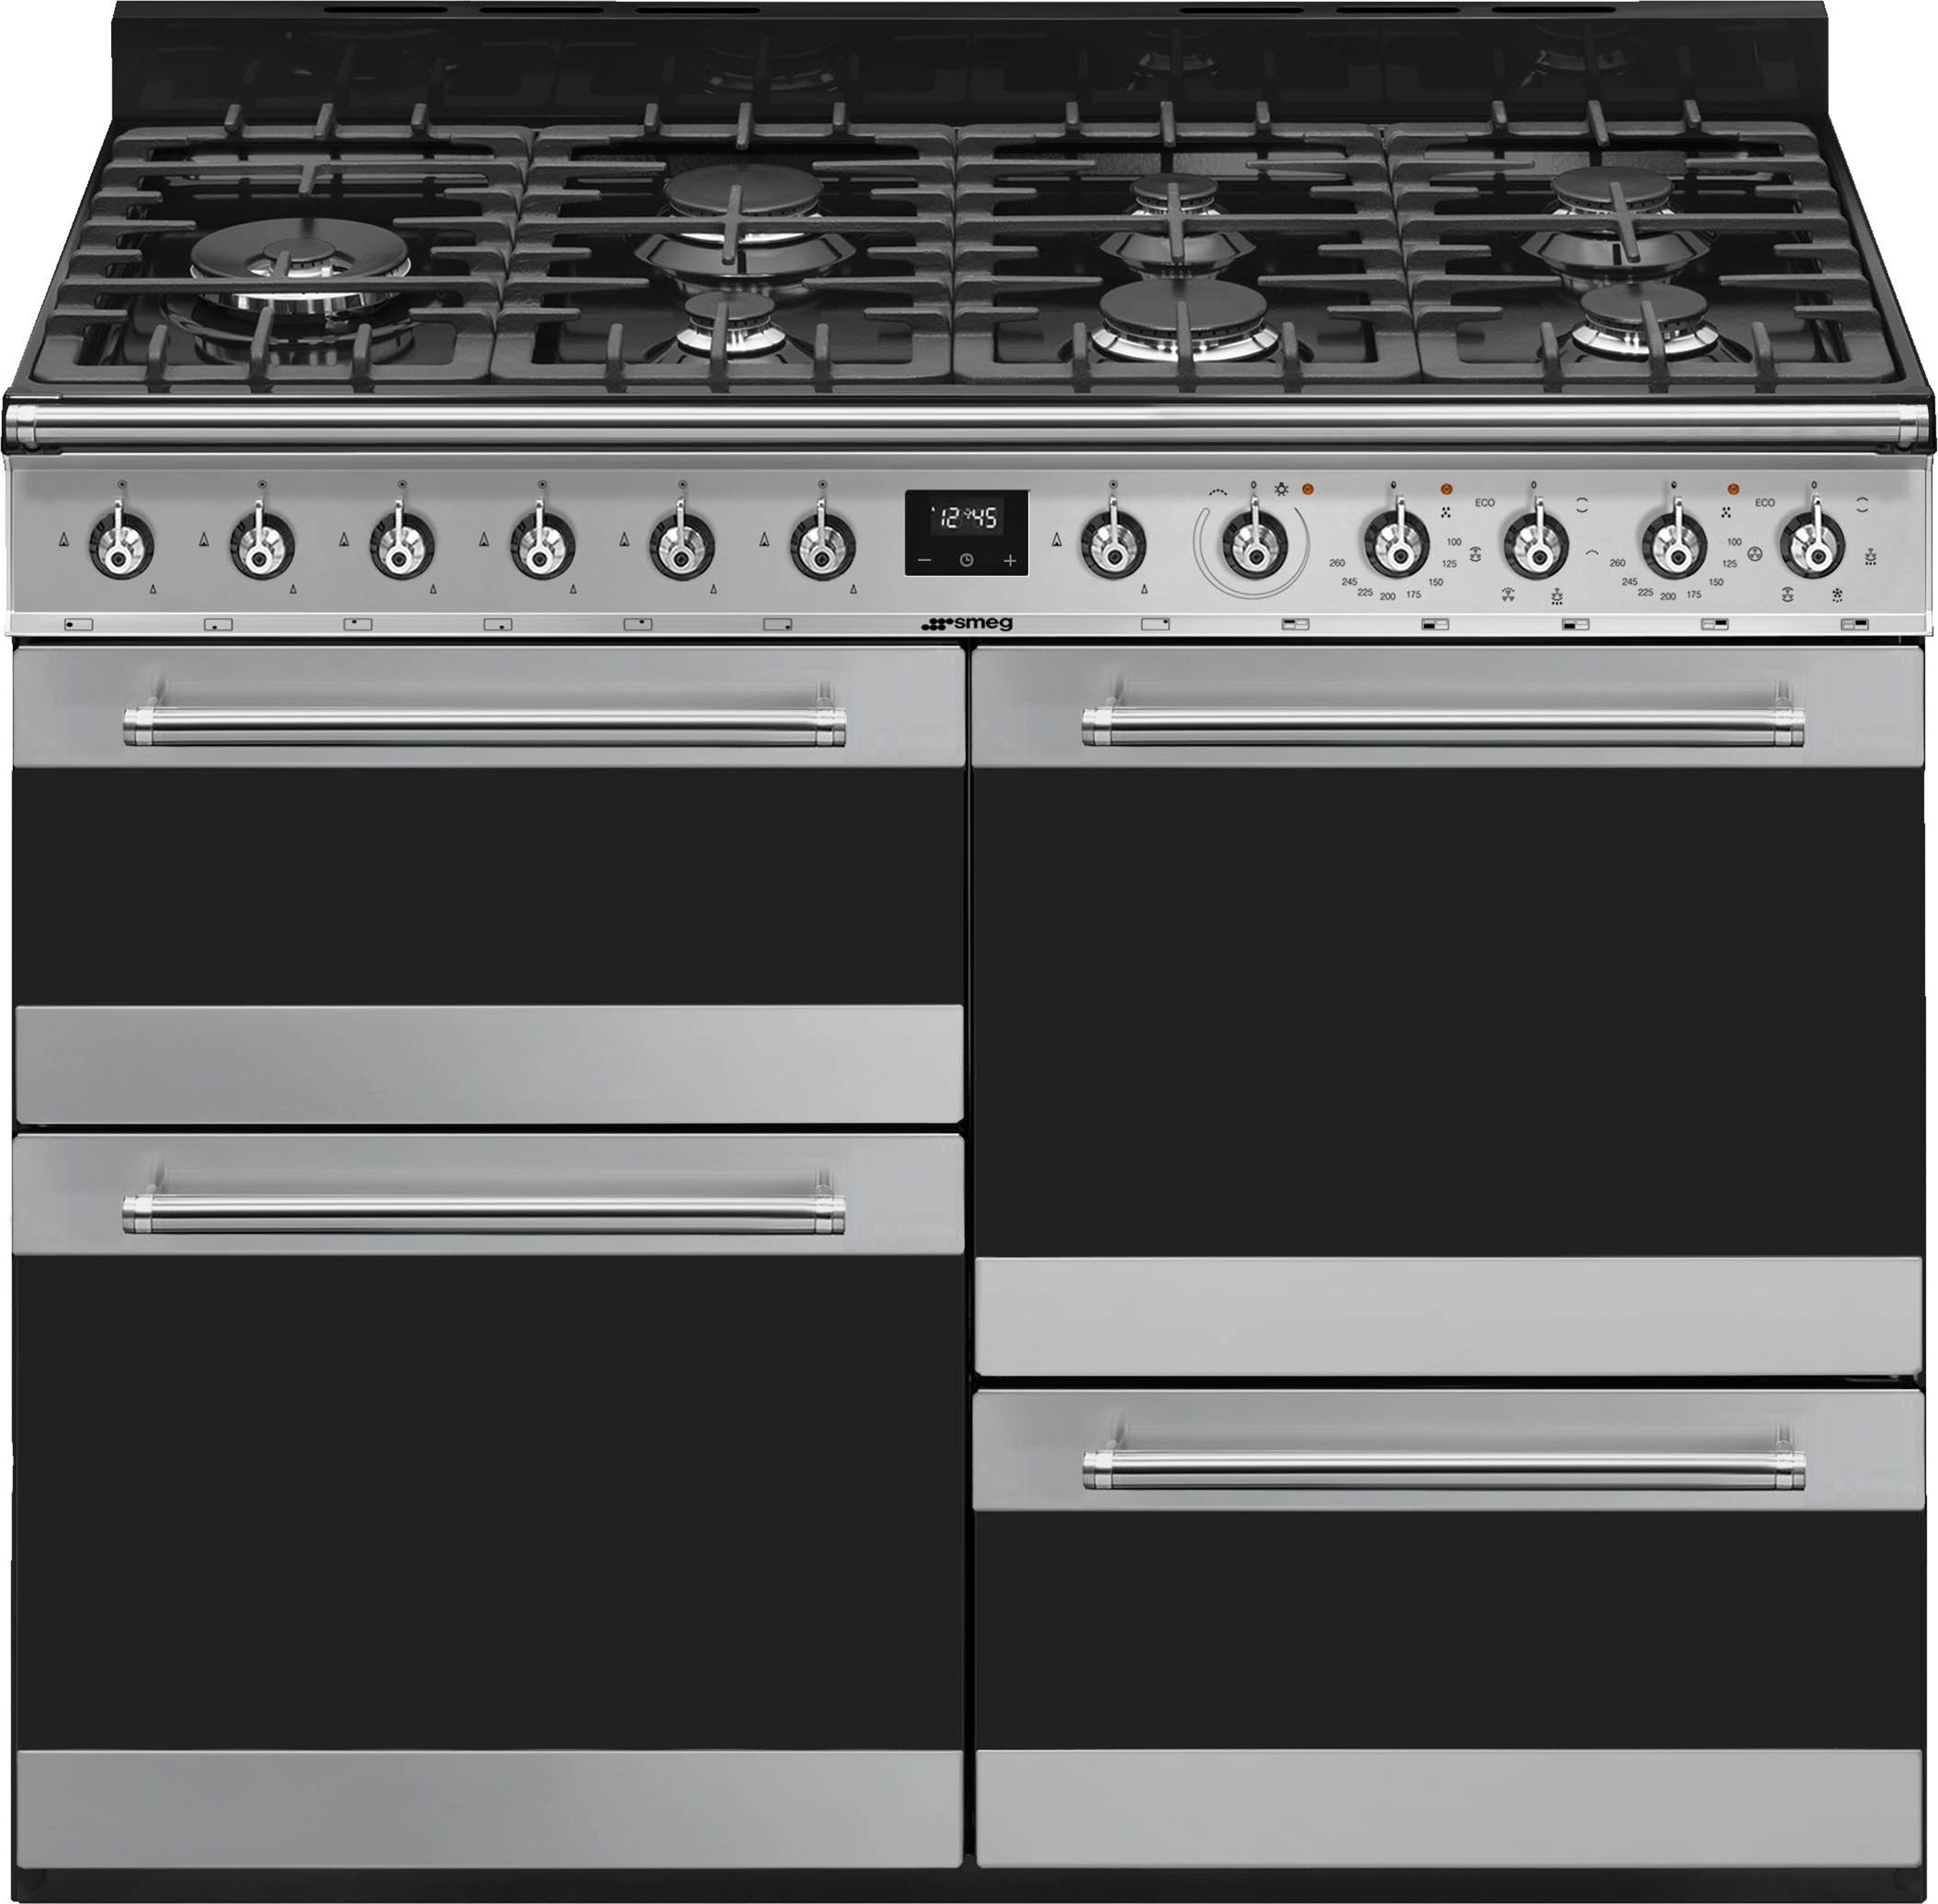 Smeg Symphony SYD4110-1 Dual Fuel Range Cooker - Stainless Steel - A/A Rated, Stainless Steel